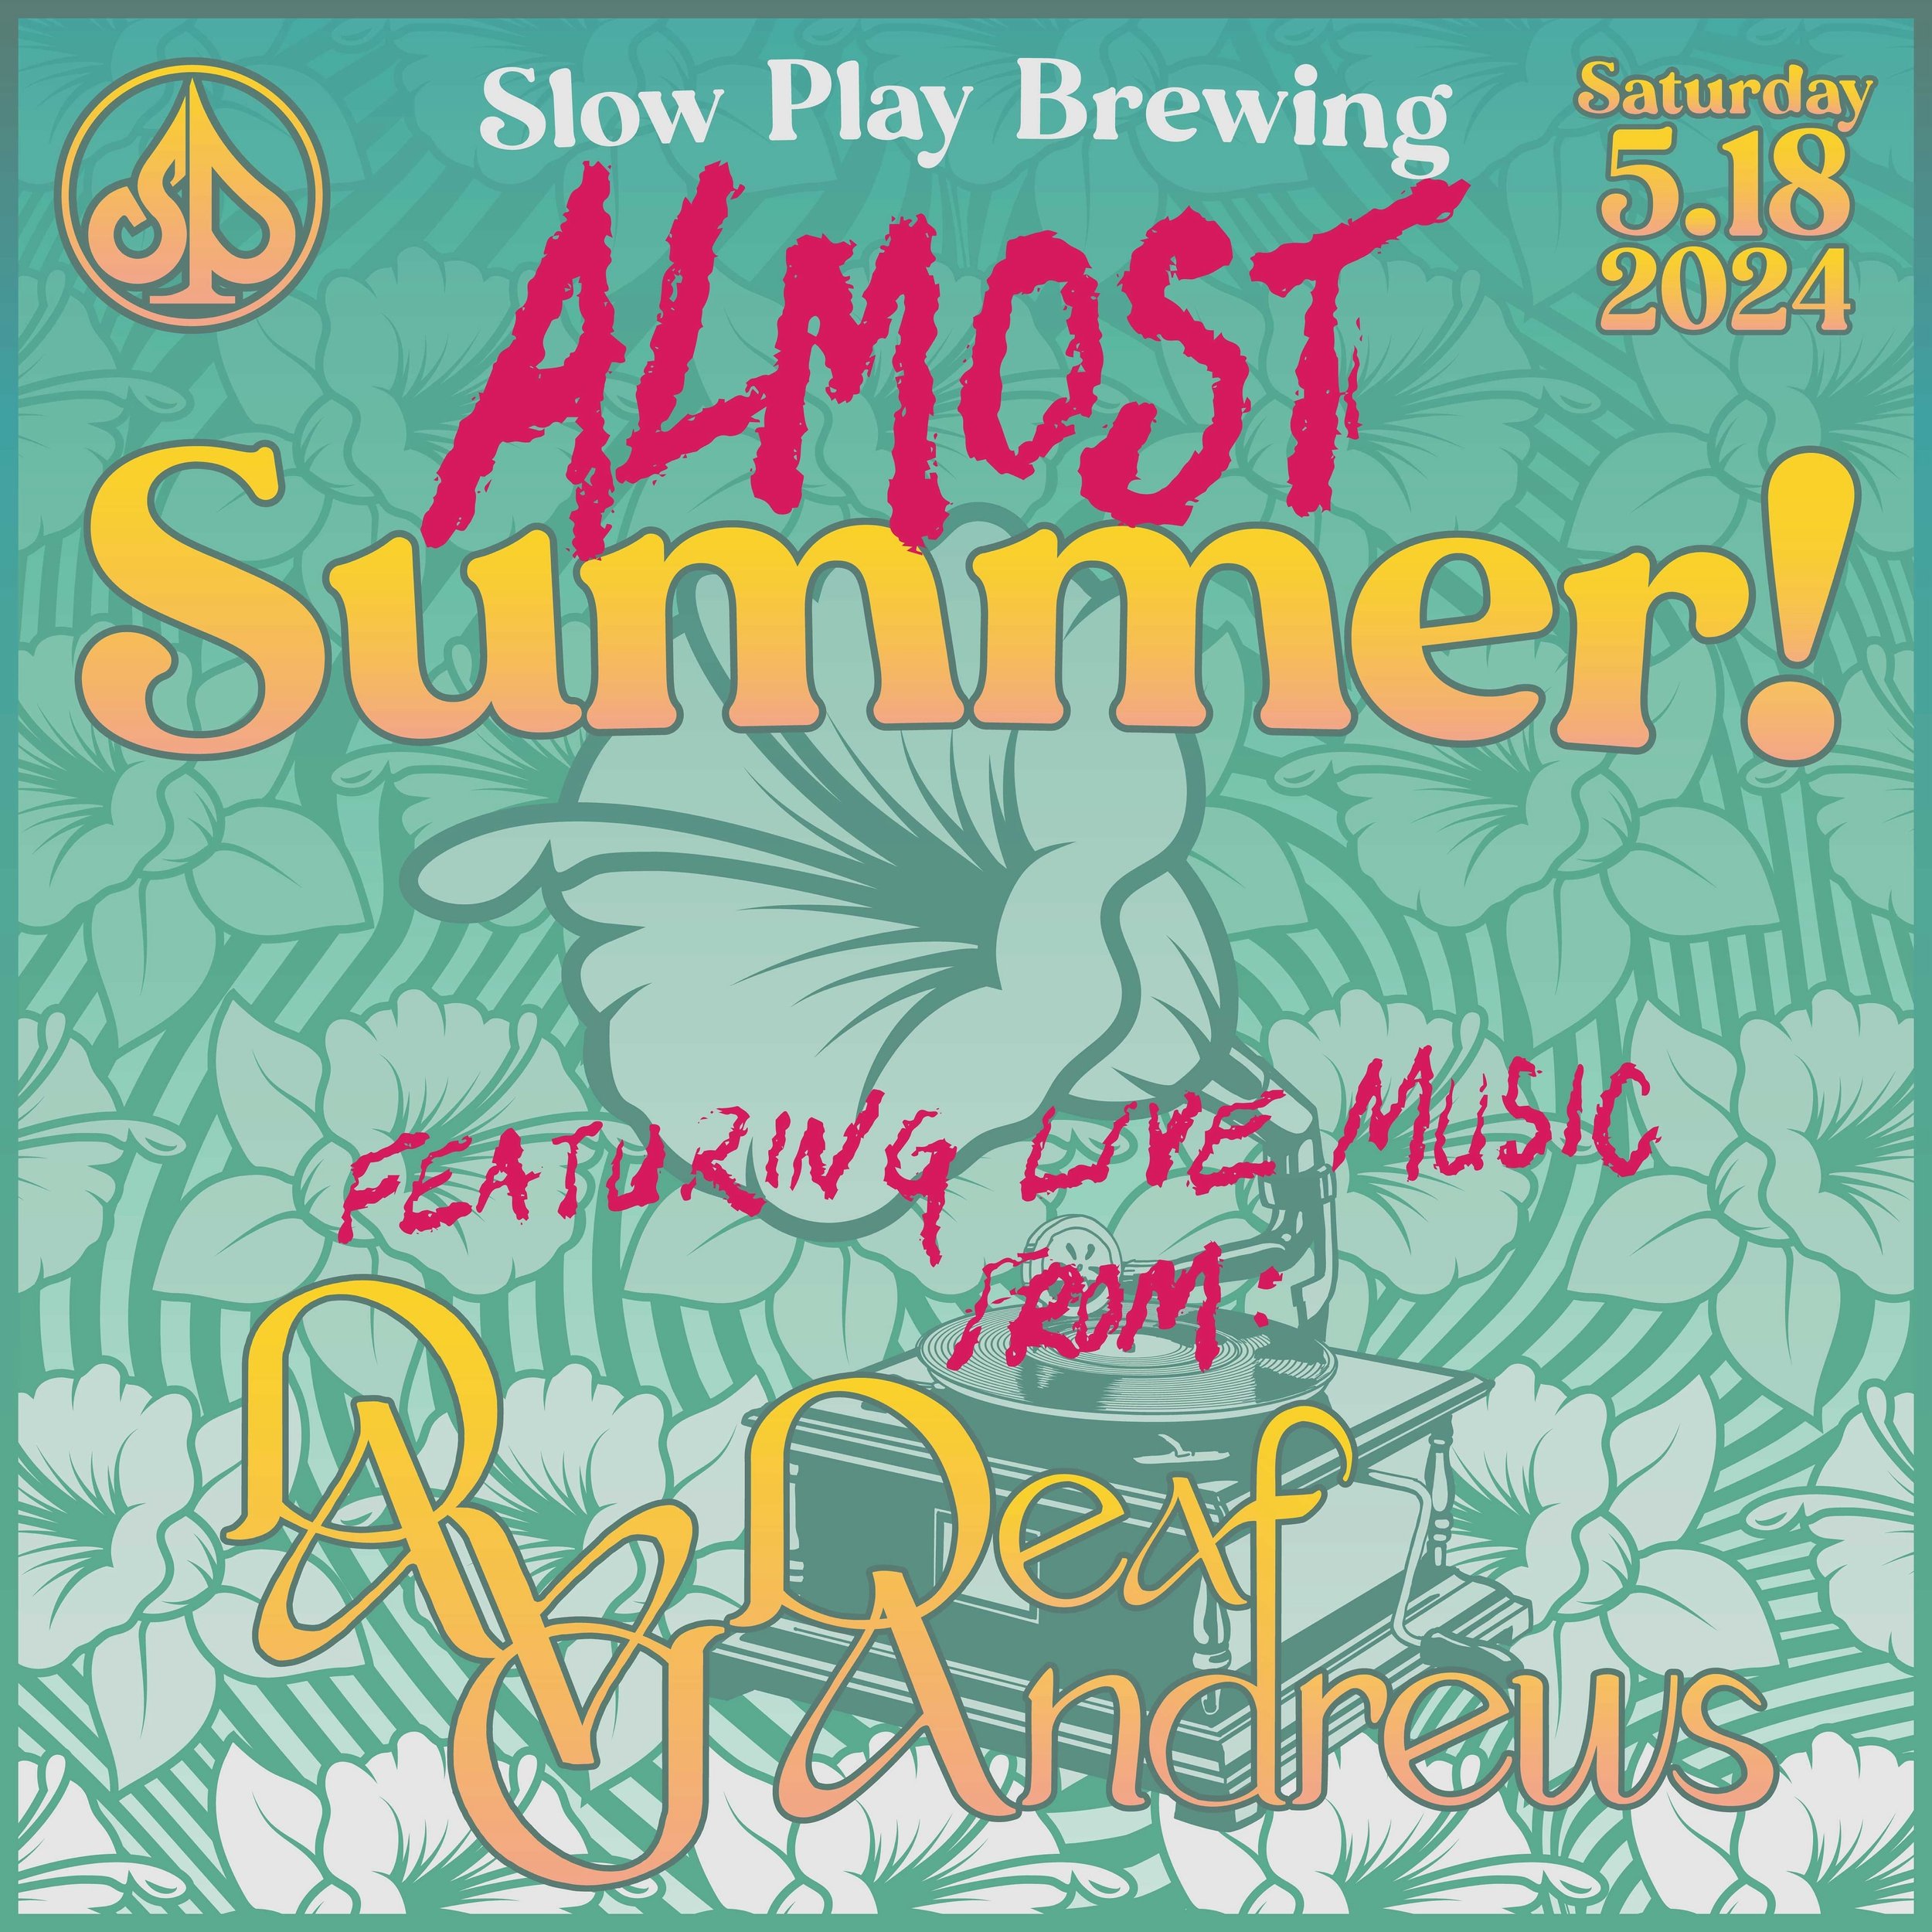 ☀️ ALMOST SUMMER &bull; 05.18.24 ☀️

Summer is on its way, so we&rsquo;re celebrating the longer days ahead with live tunes, great food, &amp; cold bevs! NEXT SATURDAY, May 18th. 👇👇

🎶 TUNES: 🎶
@deafandrews 6-9pm

🍔 FOOD: 🌭
@twistedeatstruck 12